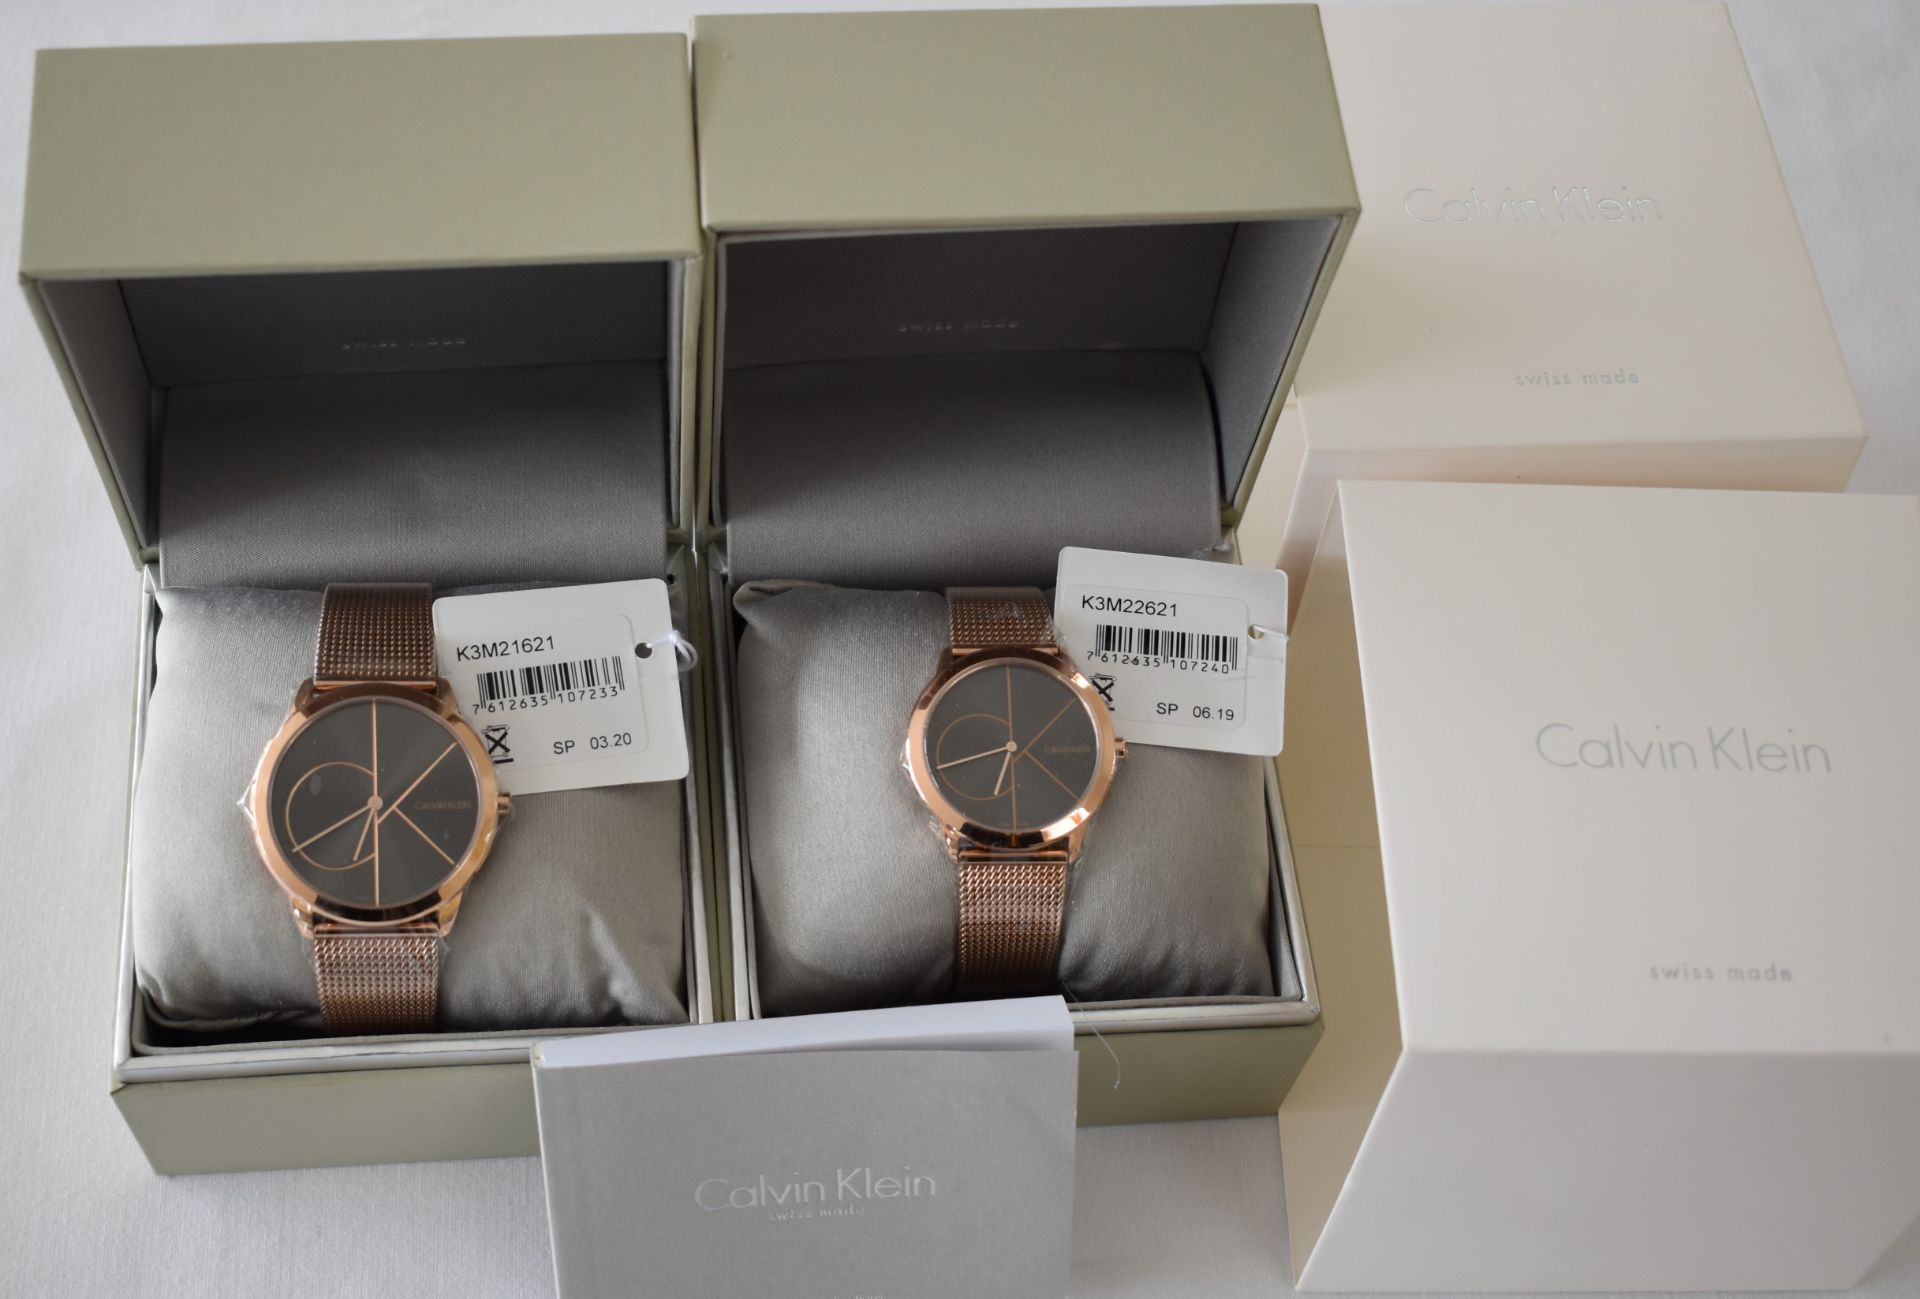 Calvin Klein His/Her K3M21621/K3M22621 Watches - Image 2 of 2